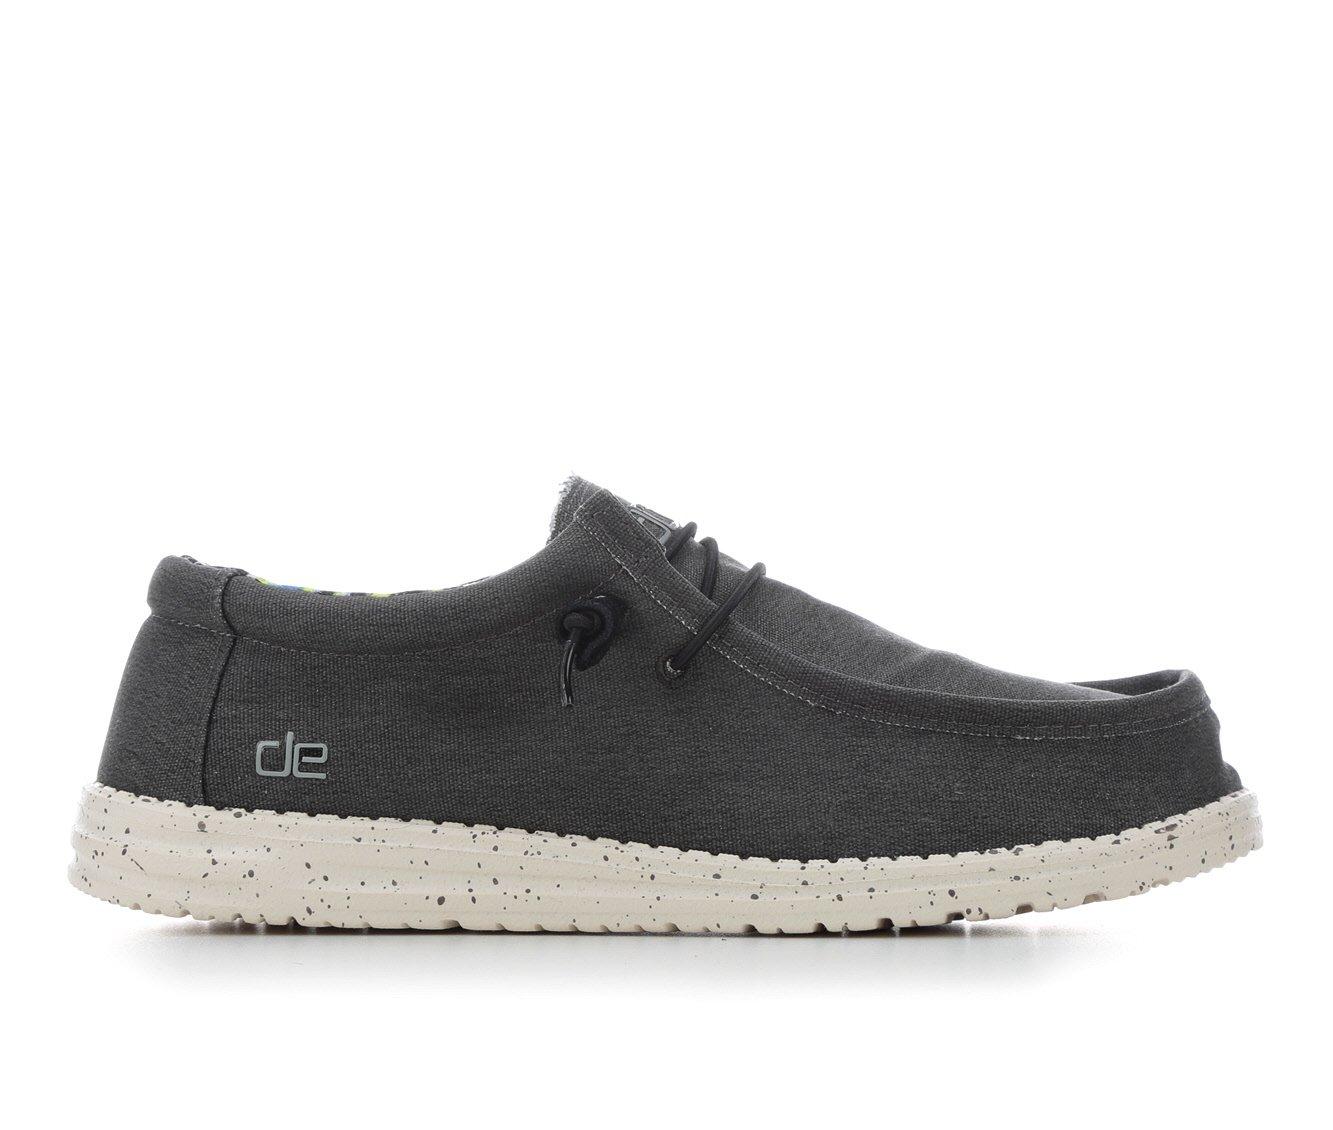 Black hey dude shoes • Compare & find best price now »